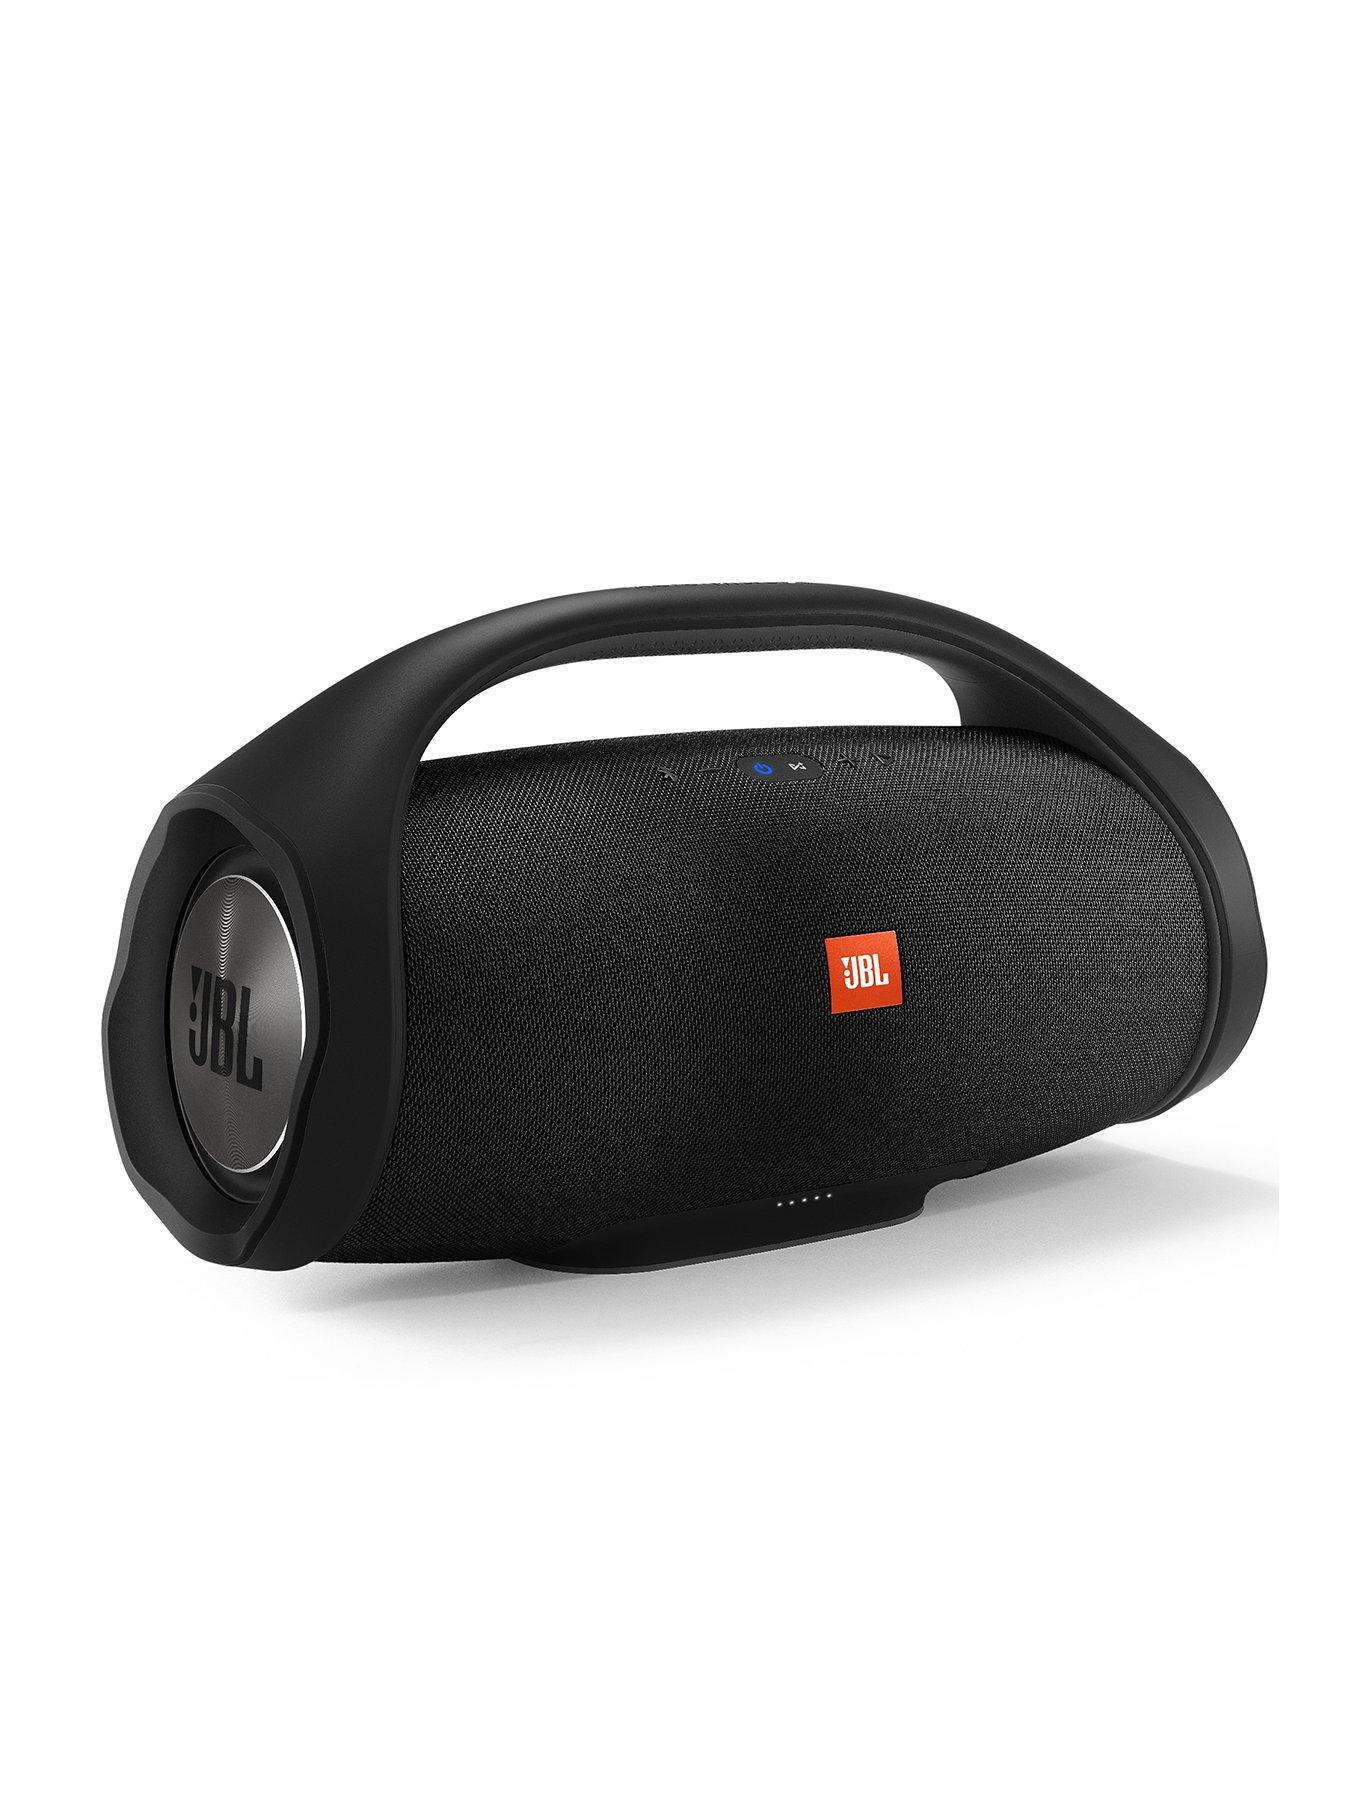 Jbl Boombox Wireless Bluetooth Rugged Portable Waterproof Speaker With 24 Hour Battery Life And Connect+